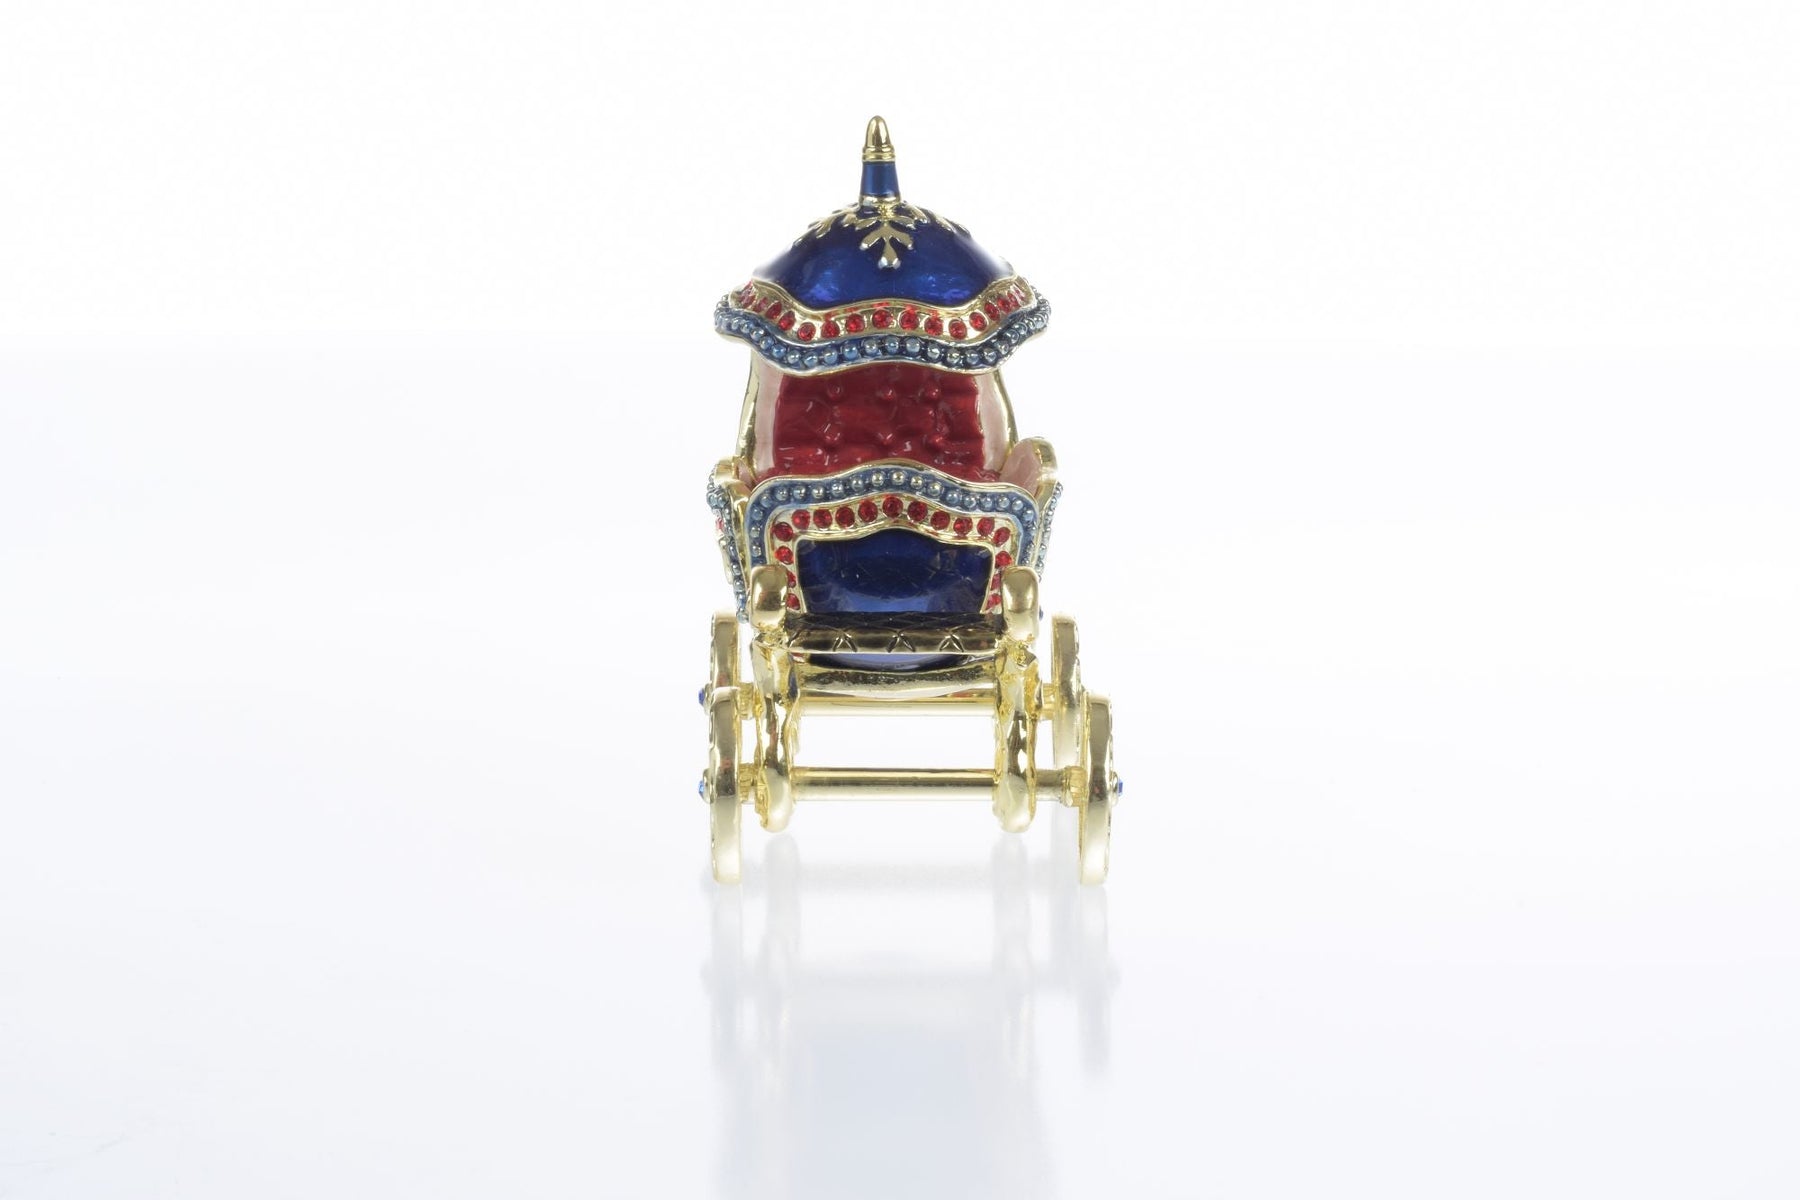 Limited Edition 1 of 250 Blue Faberge Royal Carriage Trinket Box